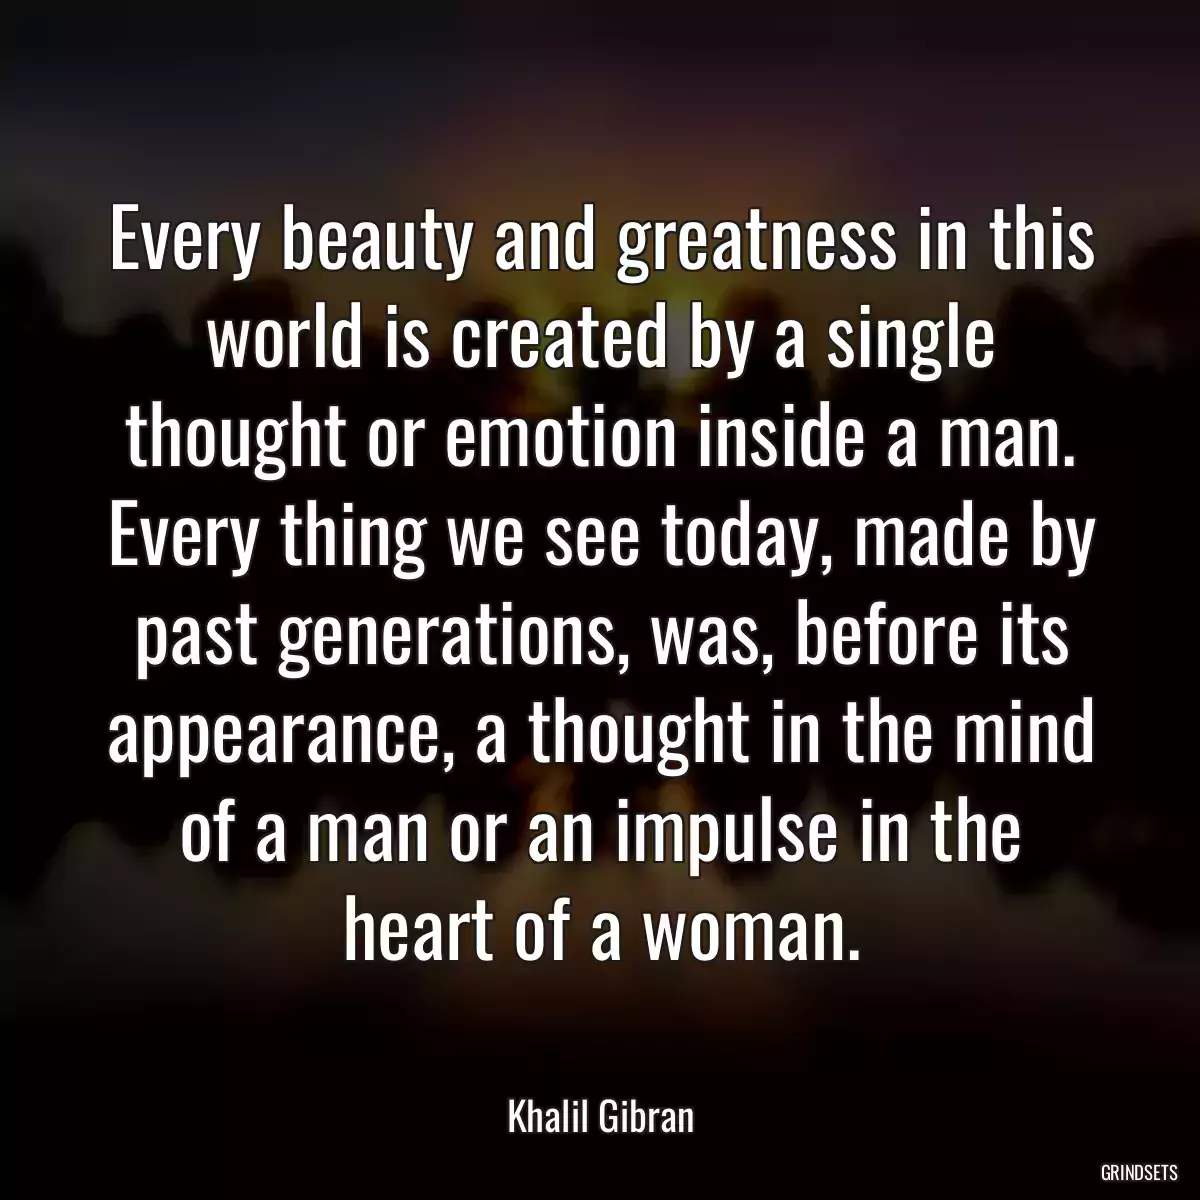 Every beauty and greatness in this world is created by a single thought or emotion inside a man. Every thing we see today, made by past generations, was, before its appearance, a thought in the mind of a man or an impulse in the heart of a woman.